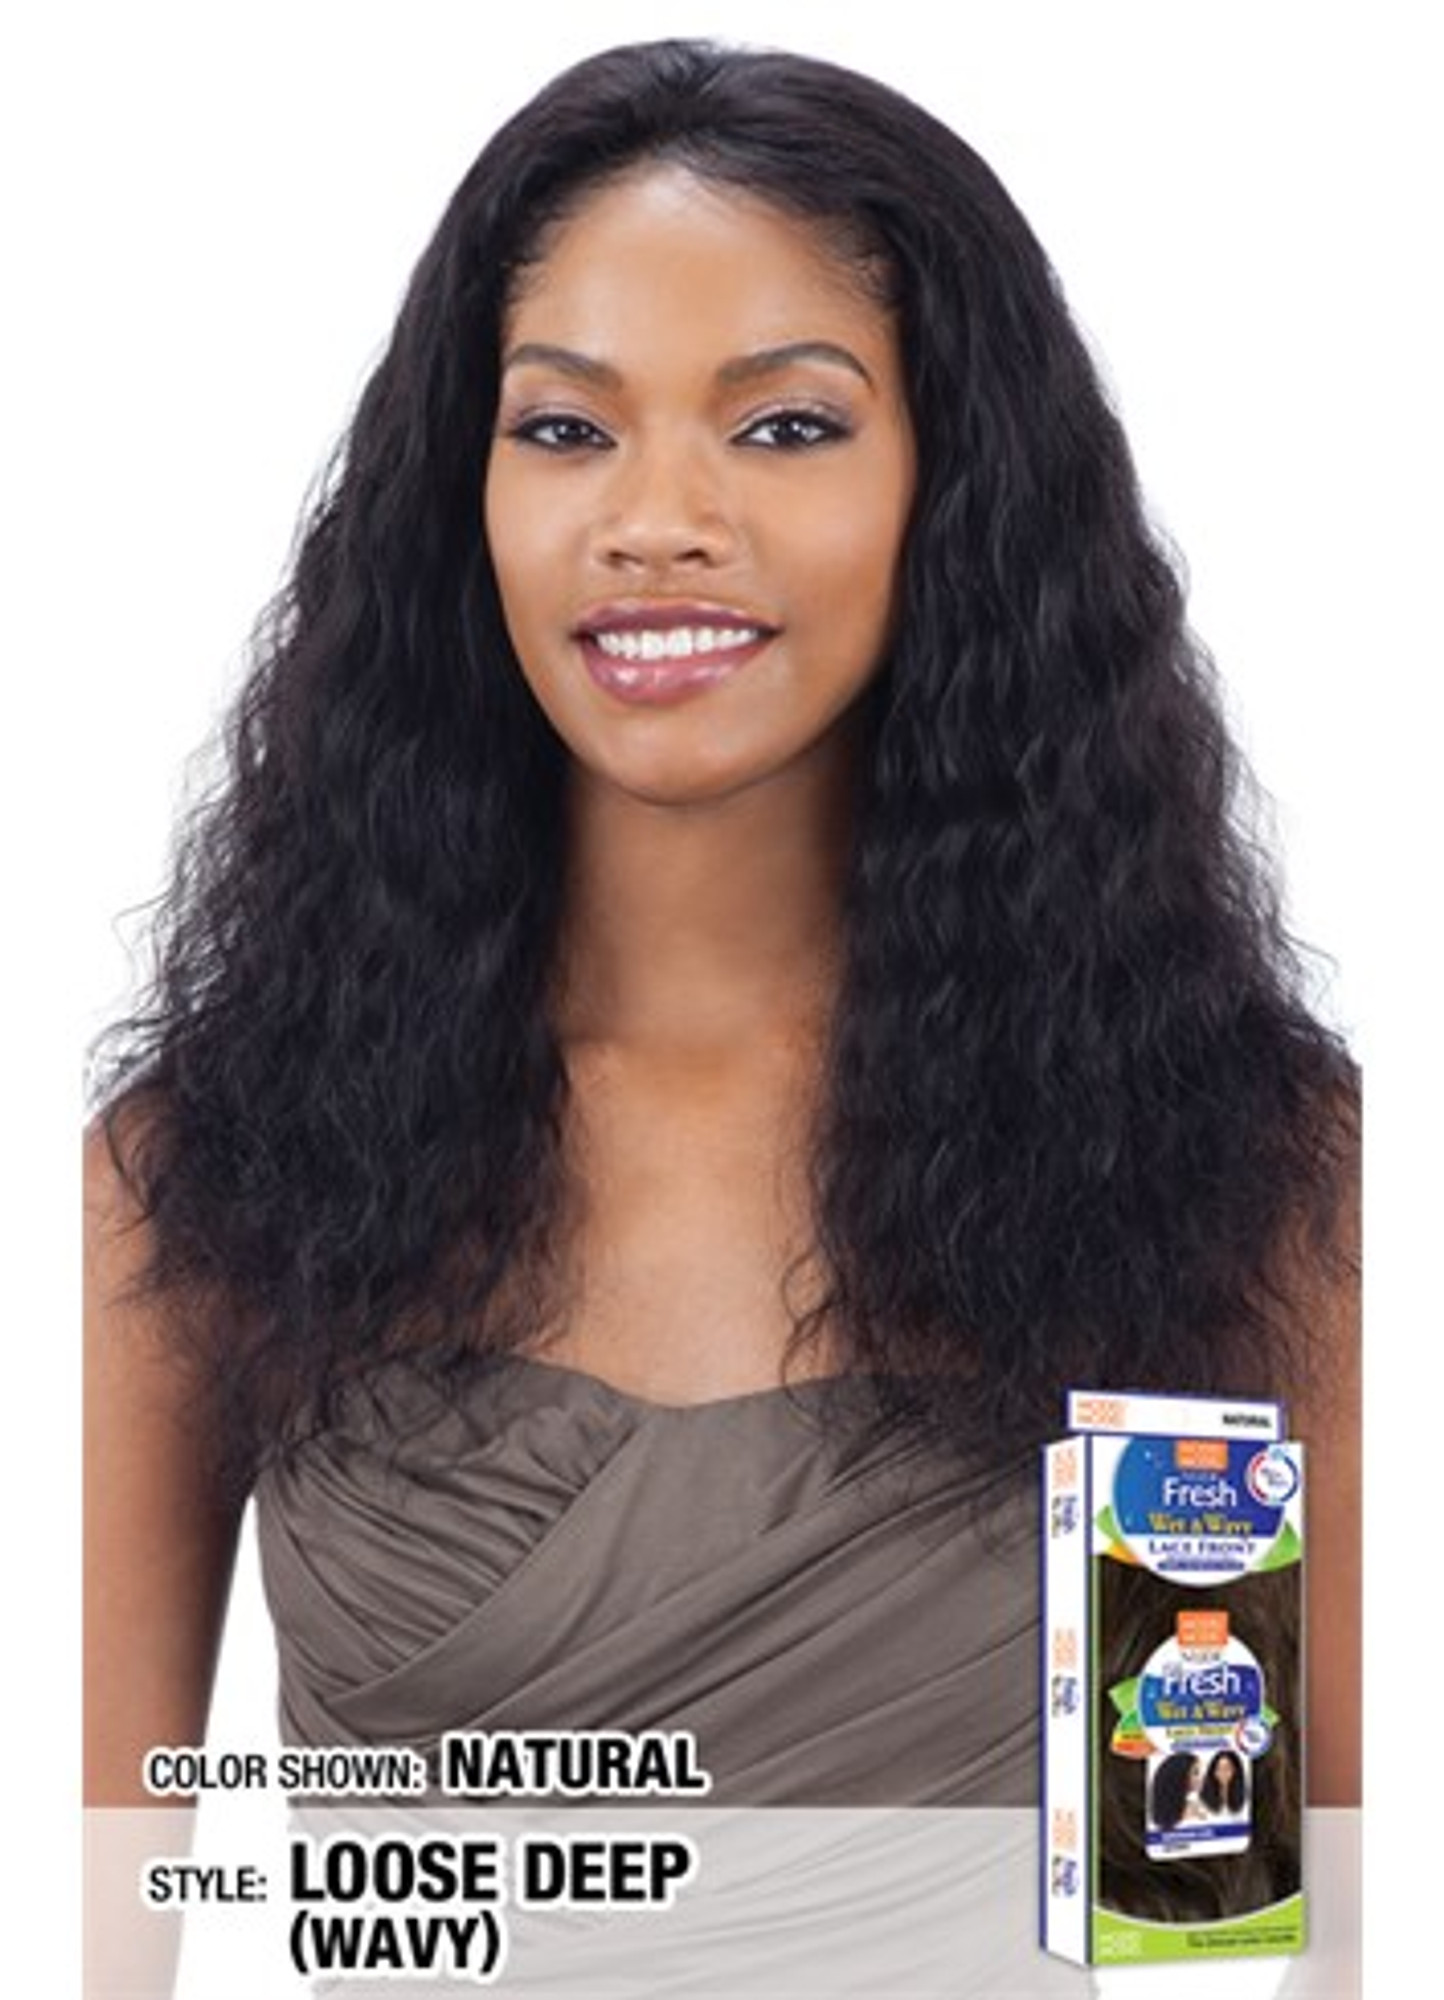 Model Model Nude Fresh Wet And Wavy Lace Front Brazilian Natural Human Hair Loose Deep Lar14